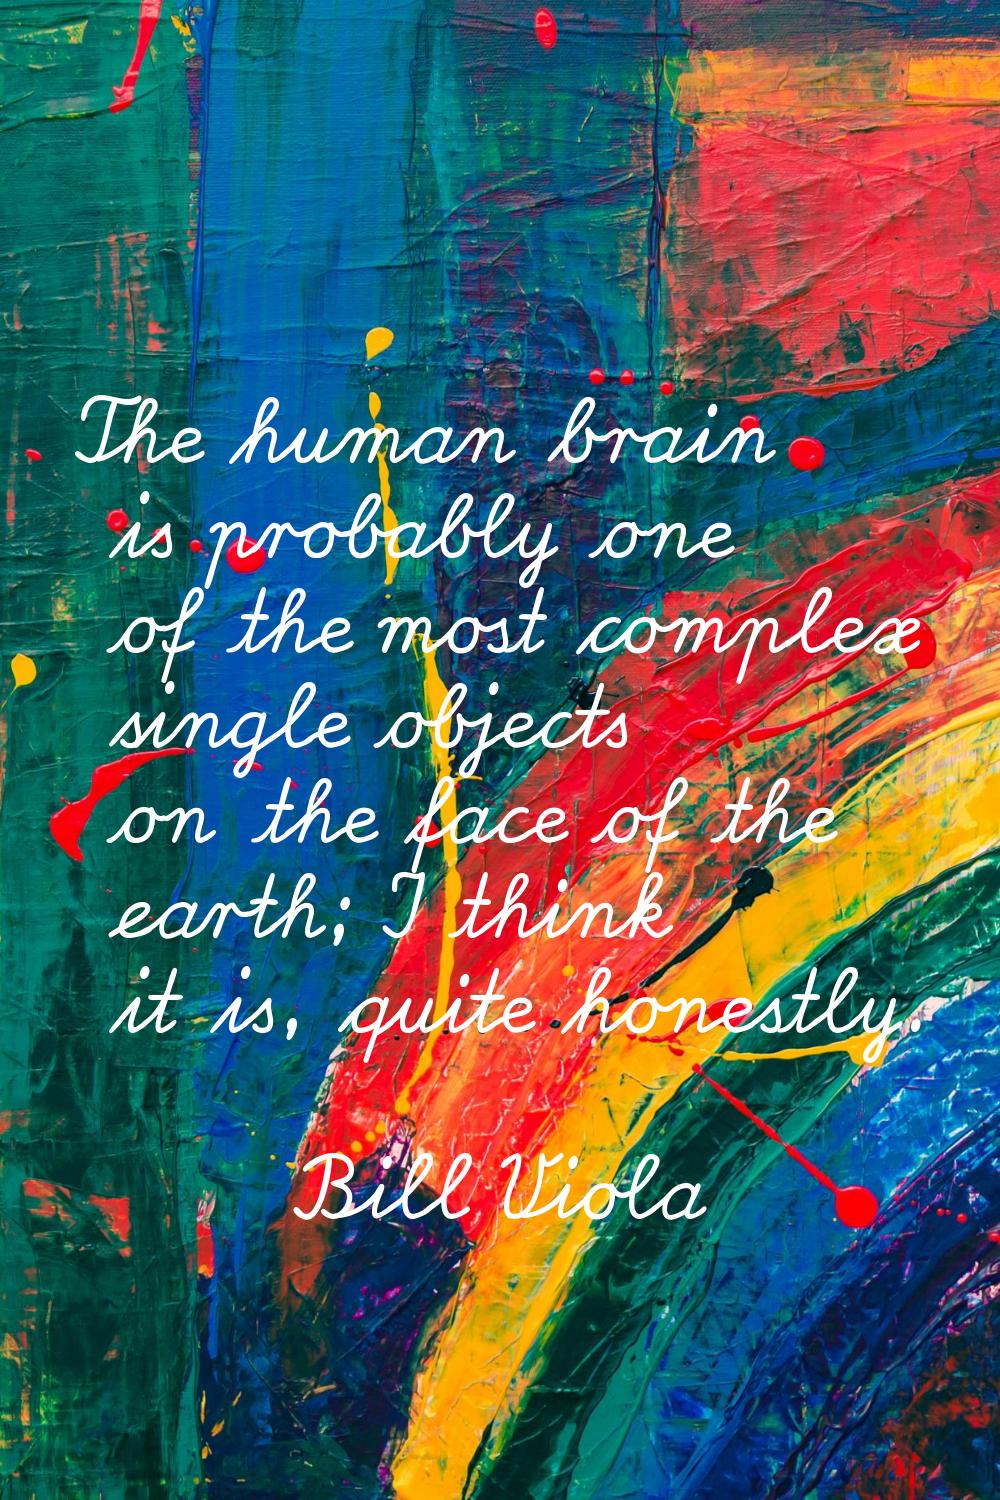 The human brain is probably one of the most complex single objects on the face of the earth; I thin